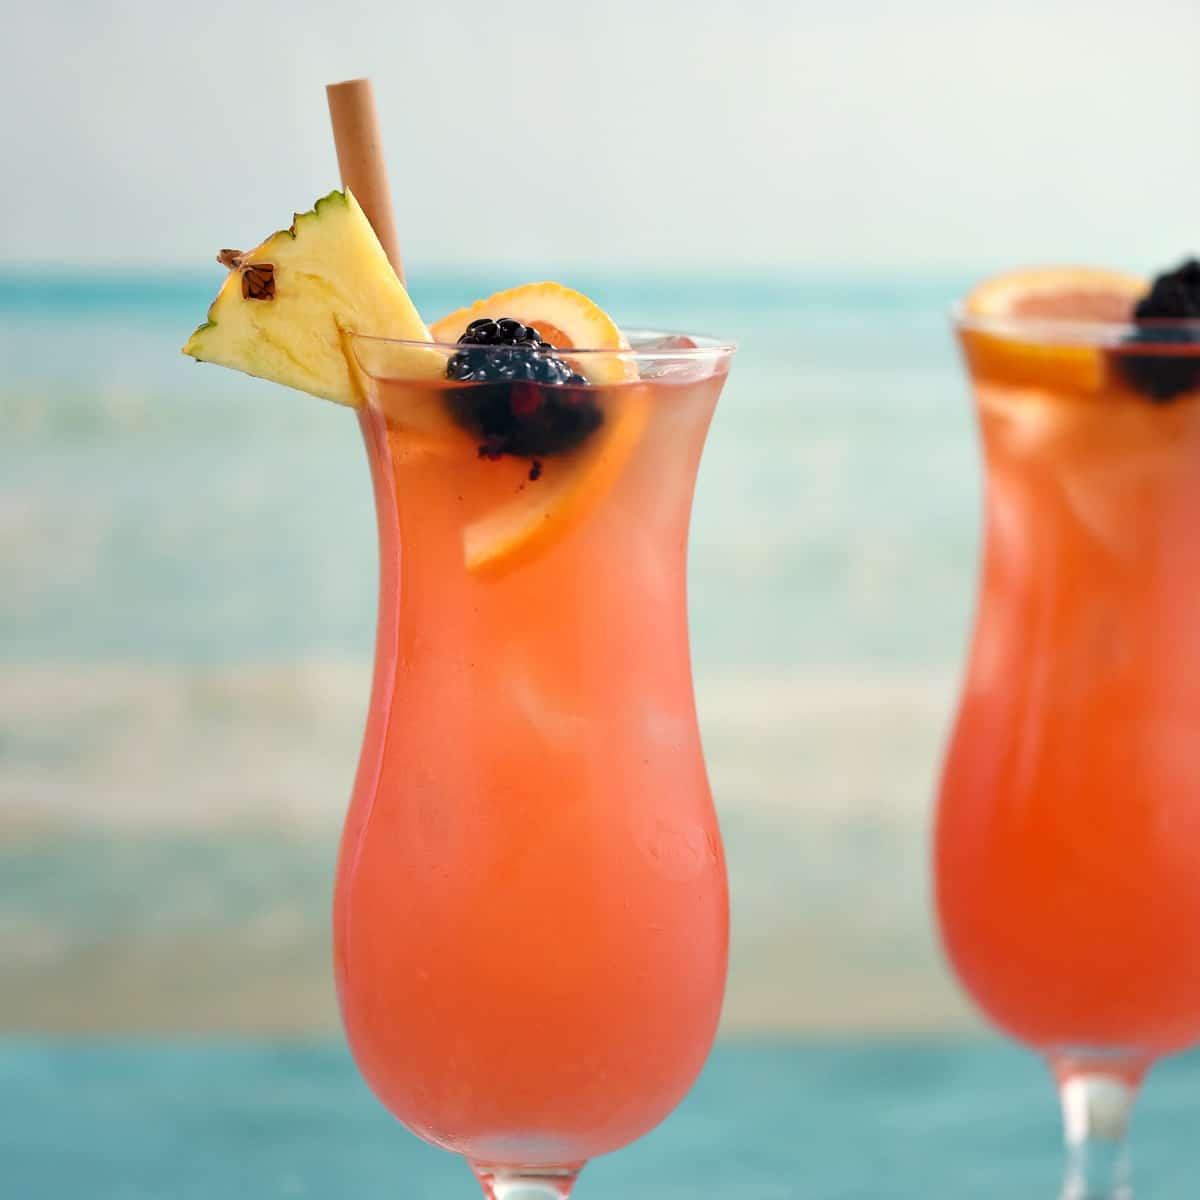 two hurricane glasses filled with a pink cocktail and garnished with a straw, pineapple wedge, orange slice and blackberry with an ocean image in the background.